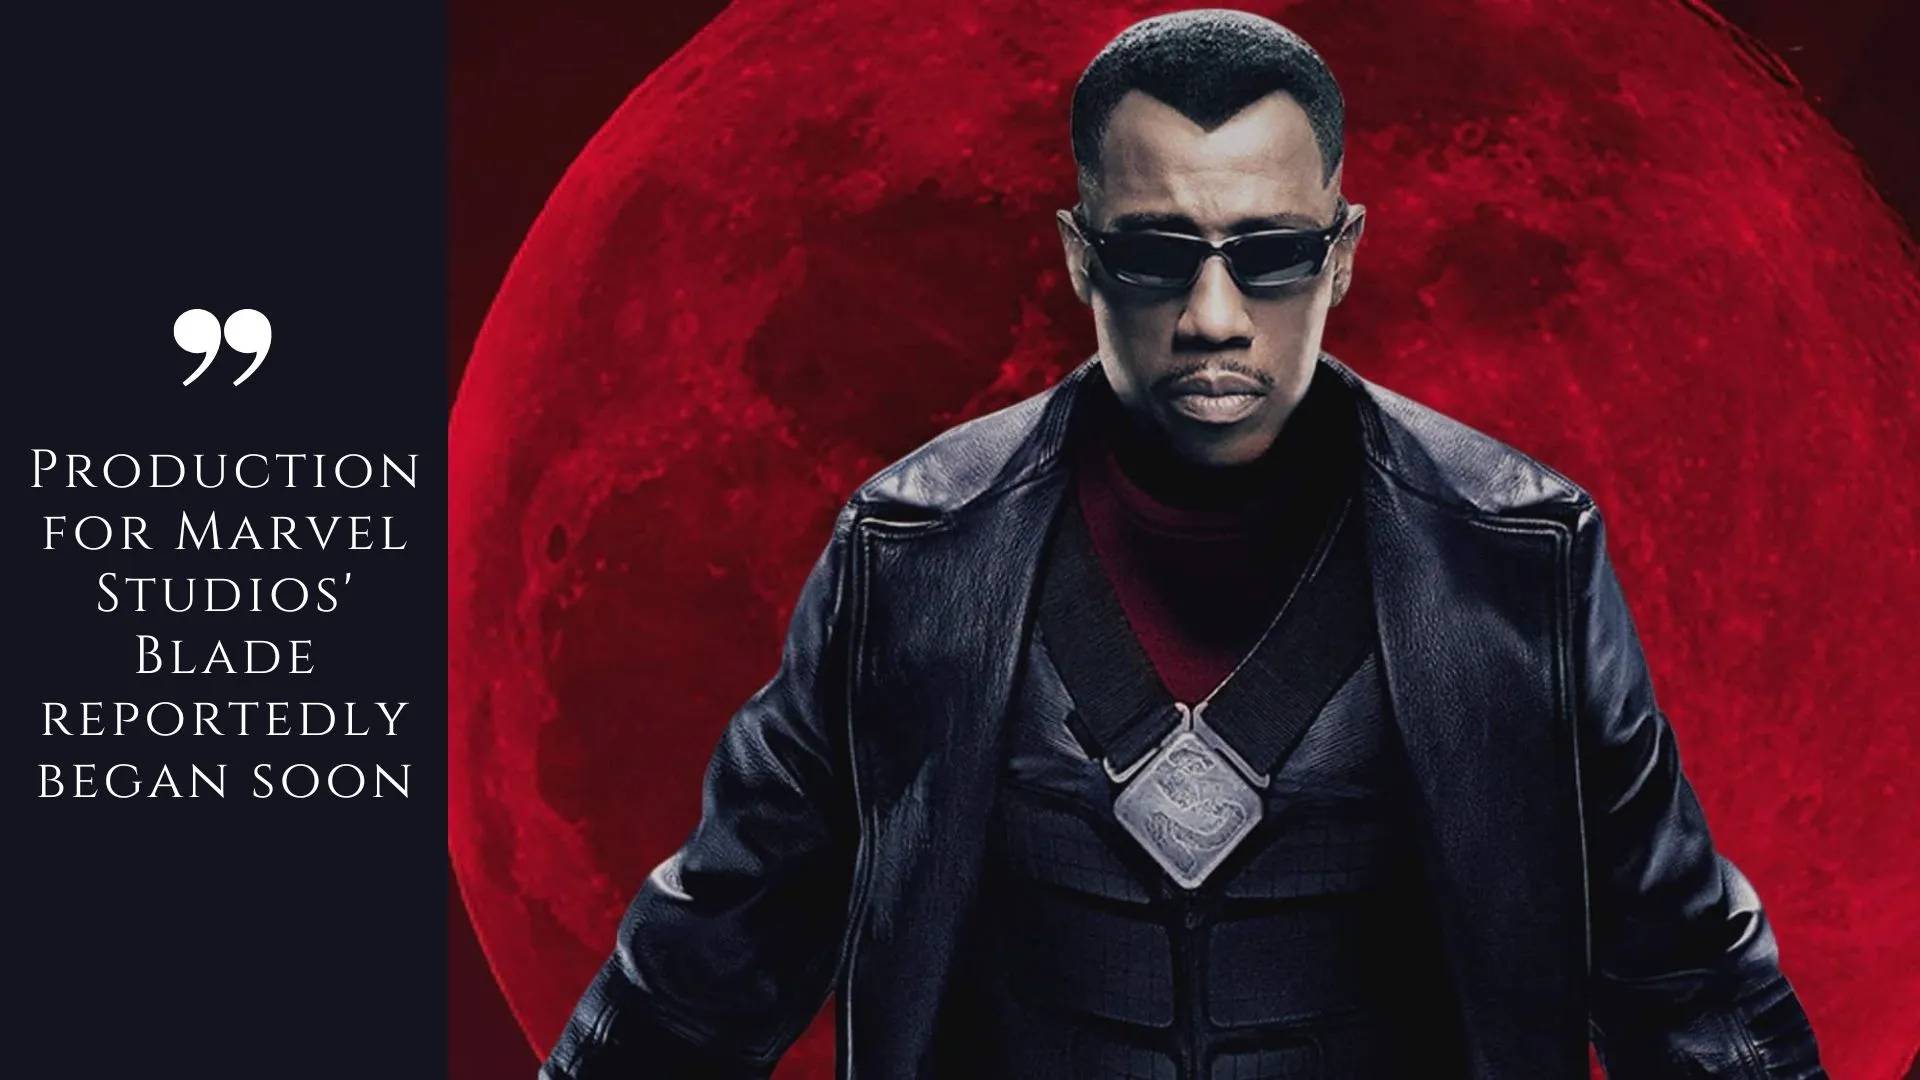 Production for Marvel Studios' Blade reportedly began soon (Image credit: fortressofsolitude)